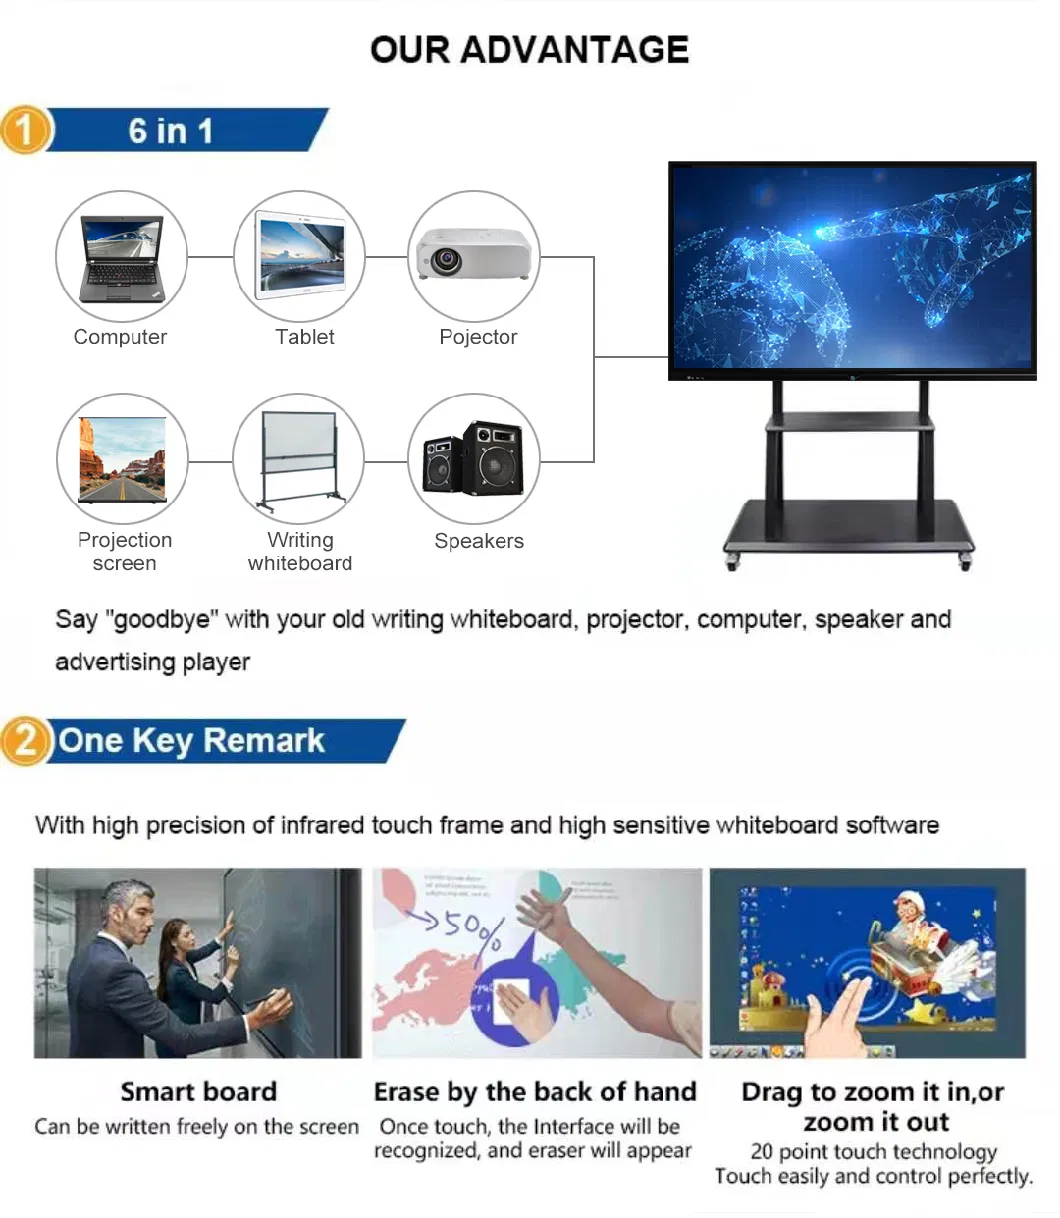 110 Inch Infrared LED All in One Touch Computer Touch Interactive Flat Panel Smart Board Miboard Kiosk Whiteboard Display LCD Screen Conference Meeting